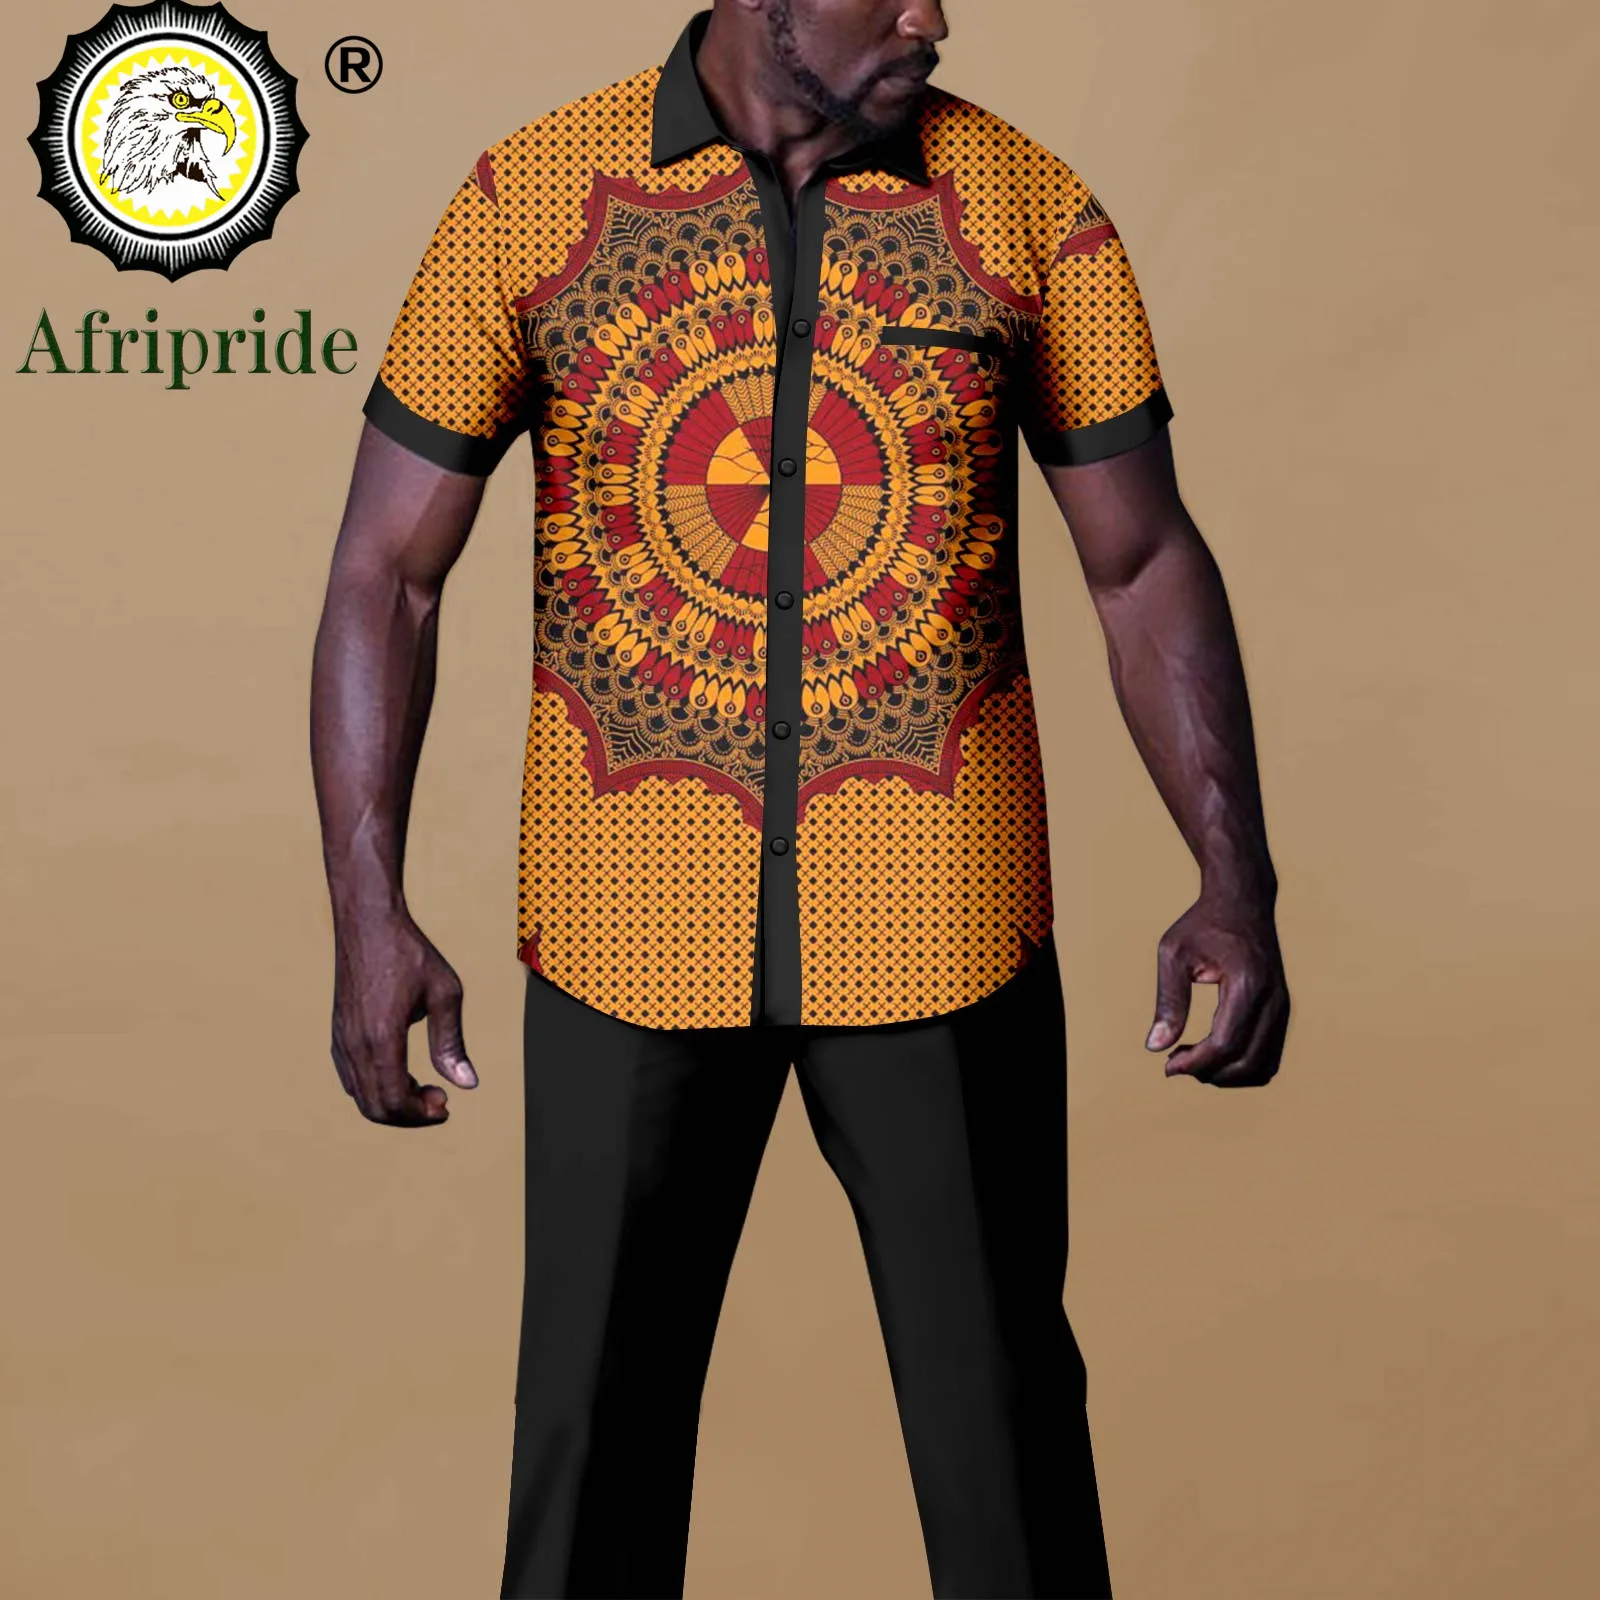 African Outfits for Men Tracksuit Short Sleeve Print Shirts and Pants Set Dashiki Outfits Plus Size Casual Sweatsuits A2216089